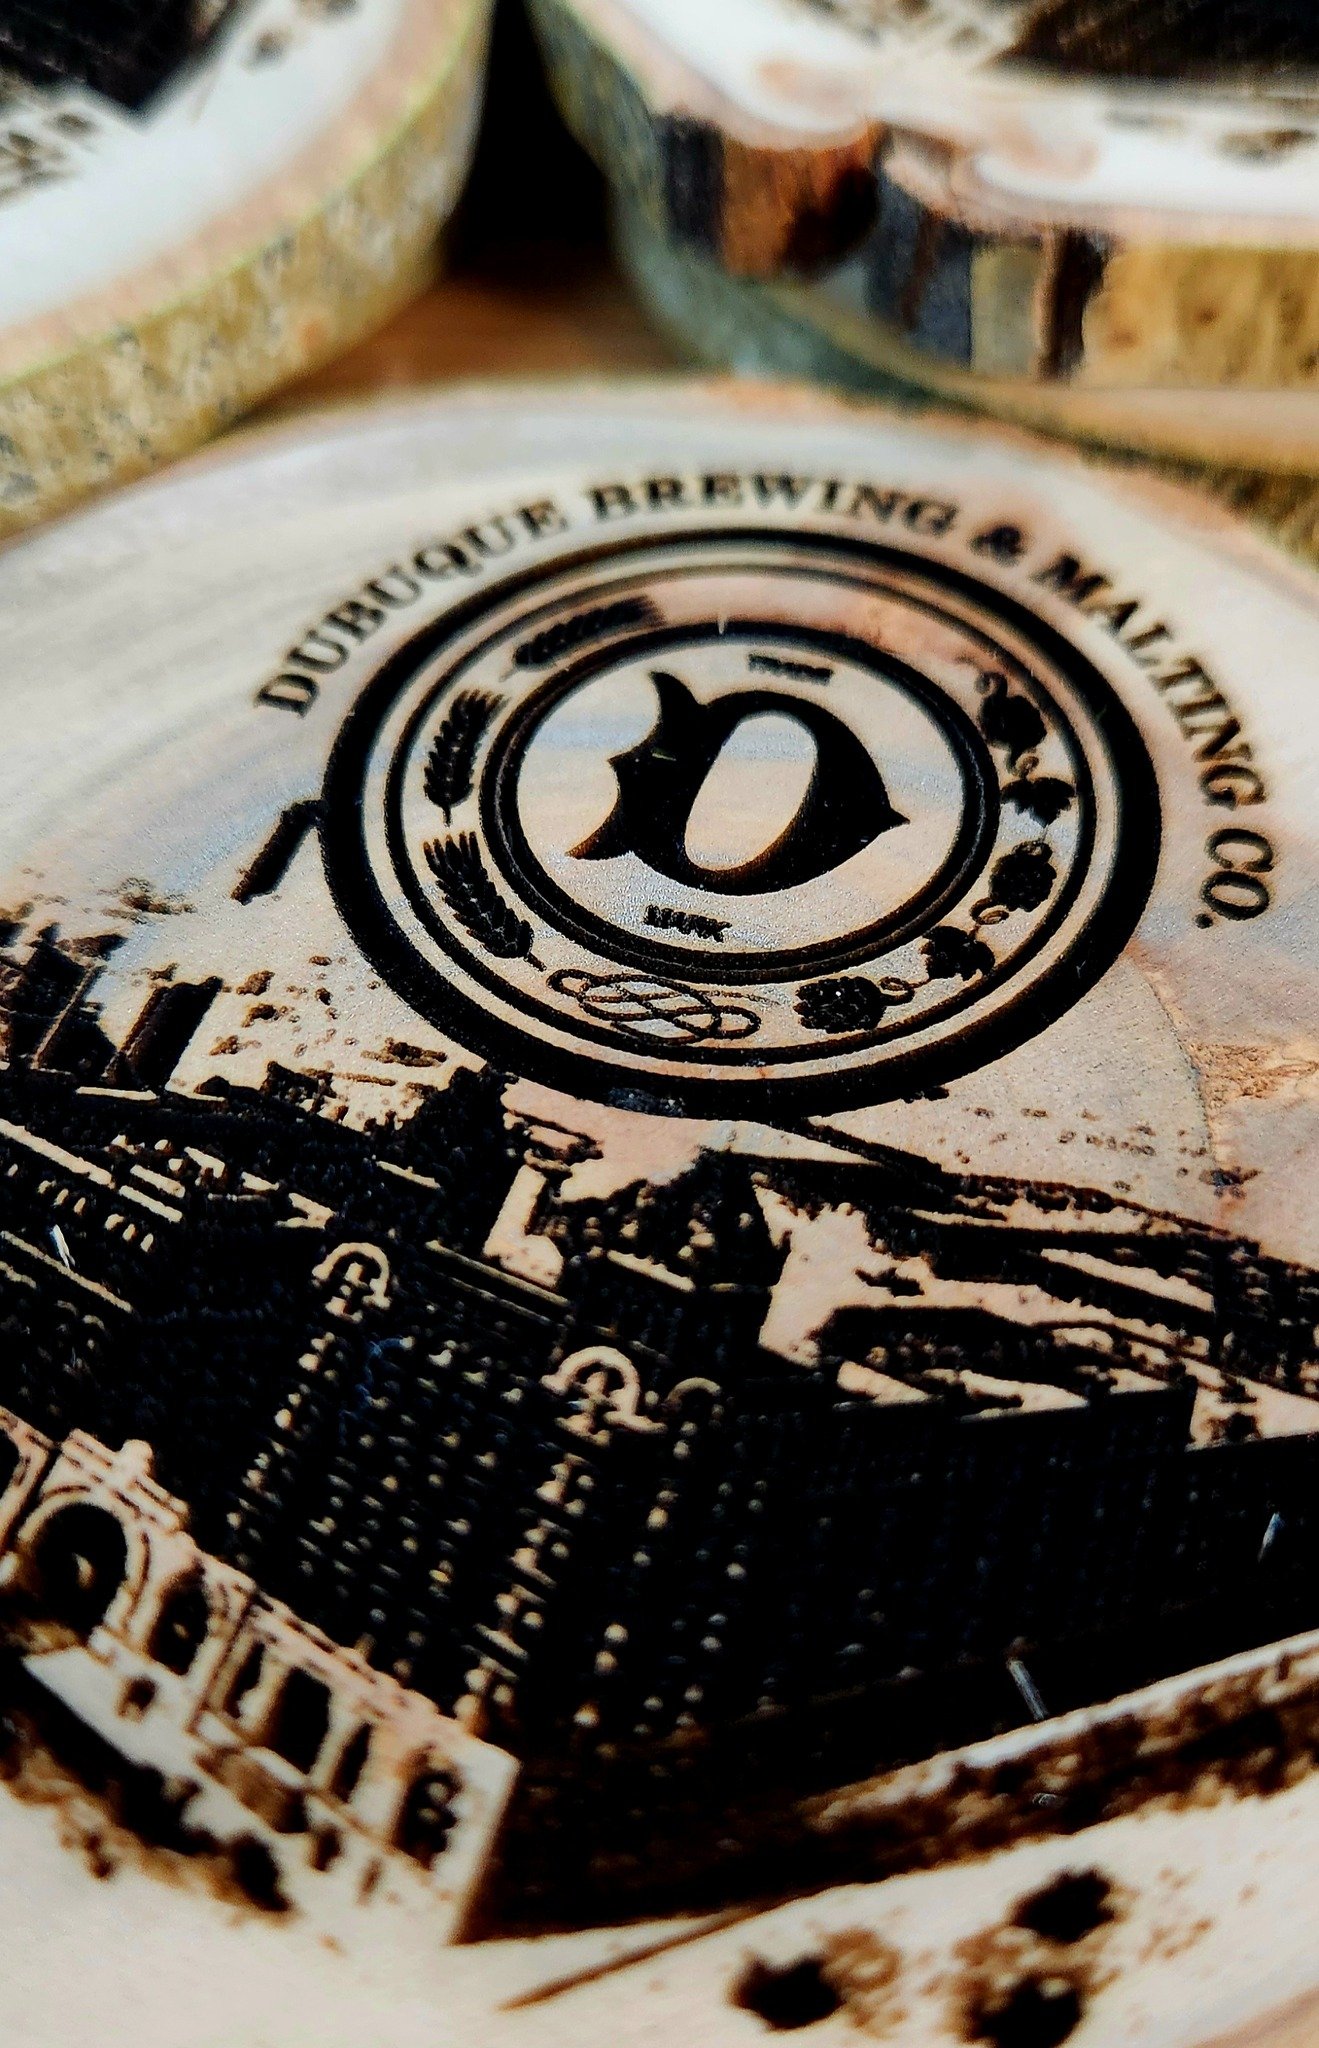 Dubuque Brewing &amp; Malting Co. we hardly knew ye. We thought this was a good wood engraving for the soon-to-be rubbish heap of its former glory. Word on the street is it's going to be a gas station and a new bank like true Dubuque fashion, then pr